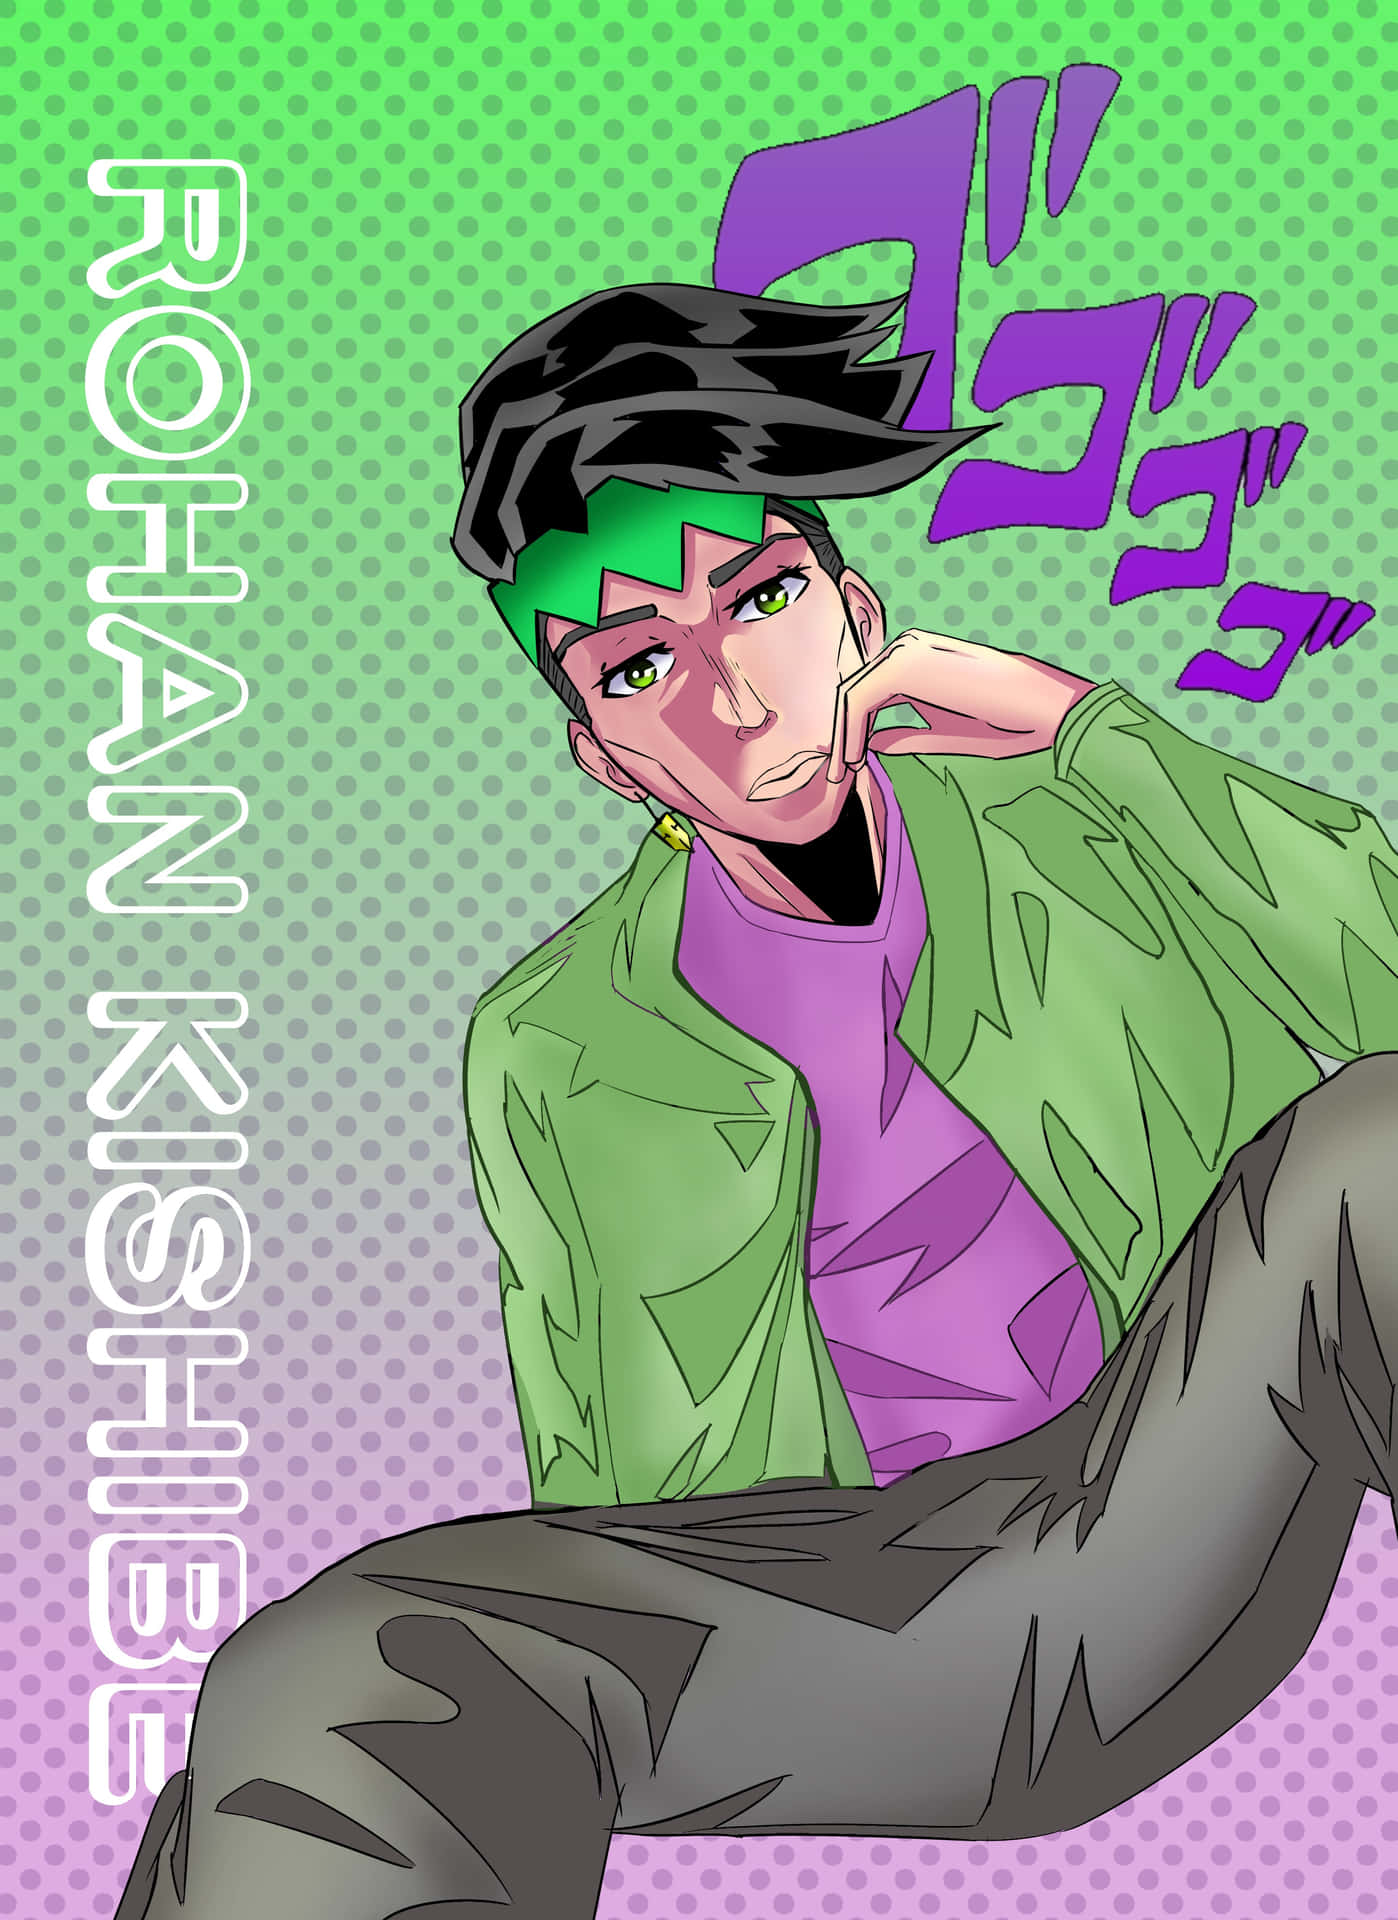 Rohan Kishibe striking a pose in his vibrant outfit Wallpaper